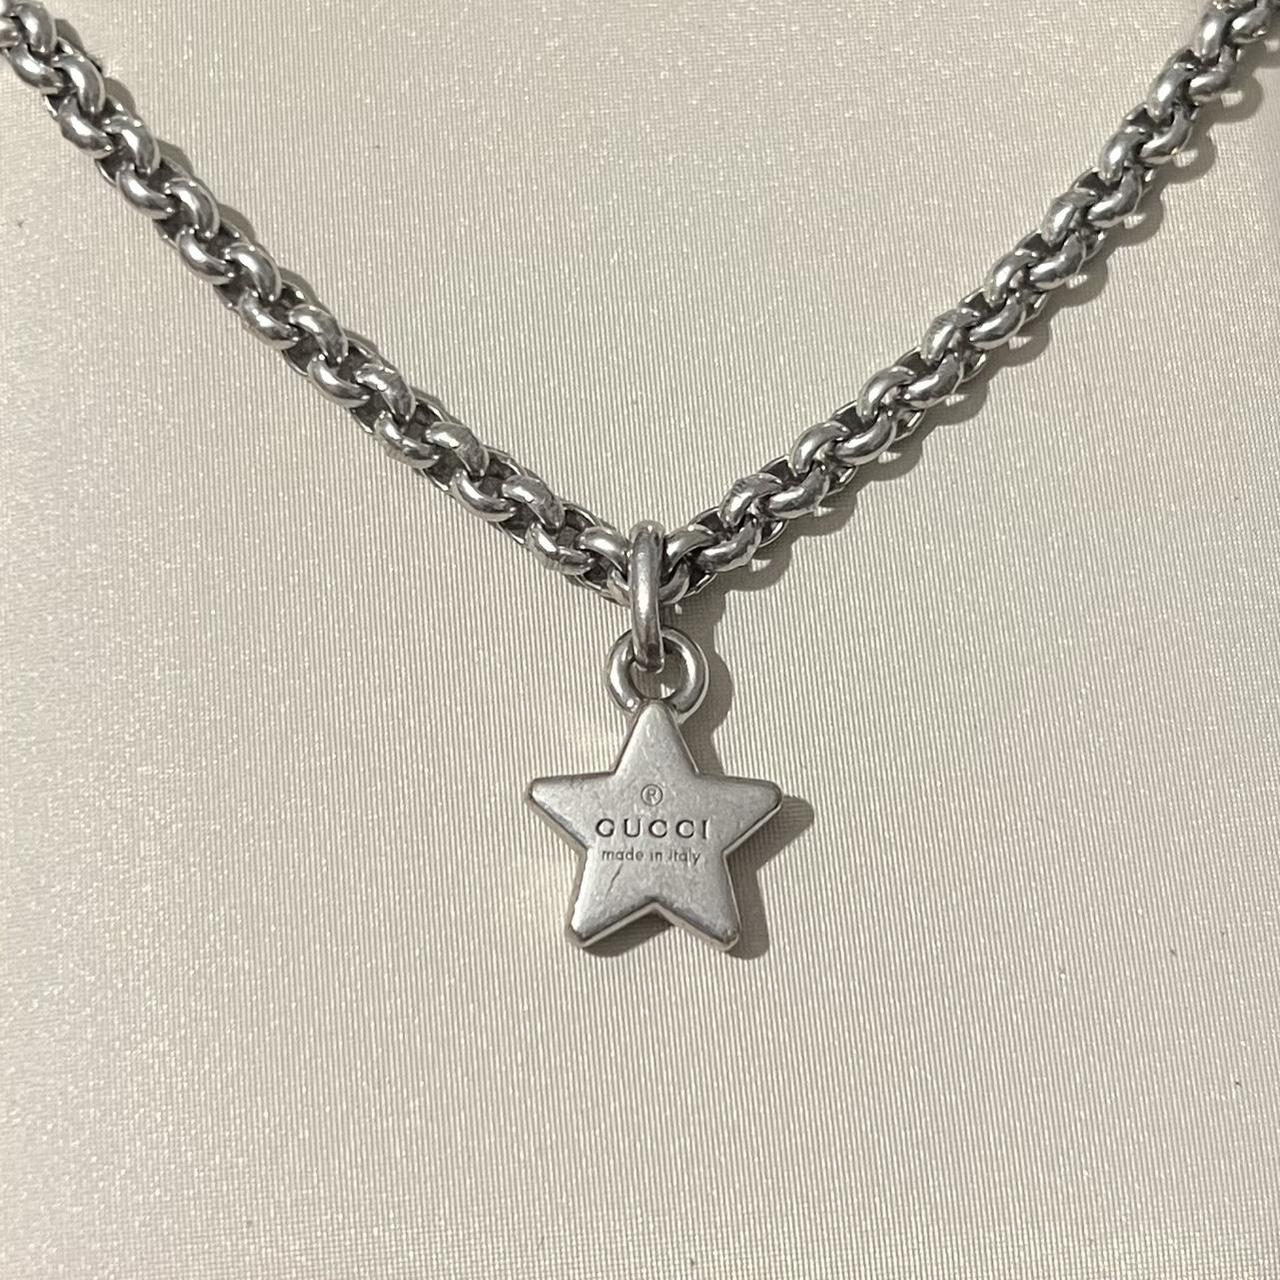 Authentic reworked Gucci star necklace. | VINTY TREASURES